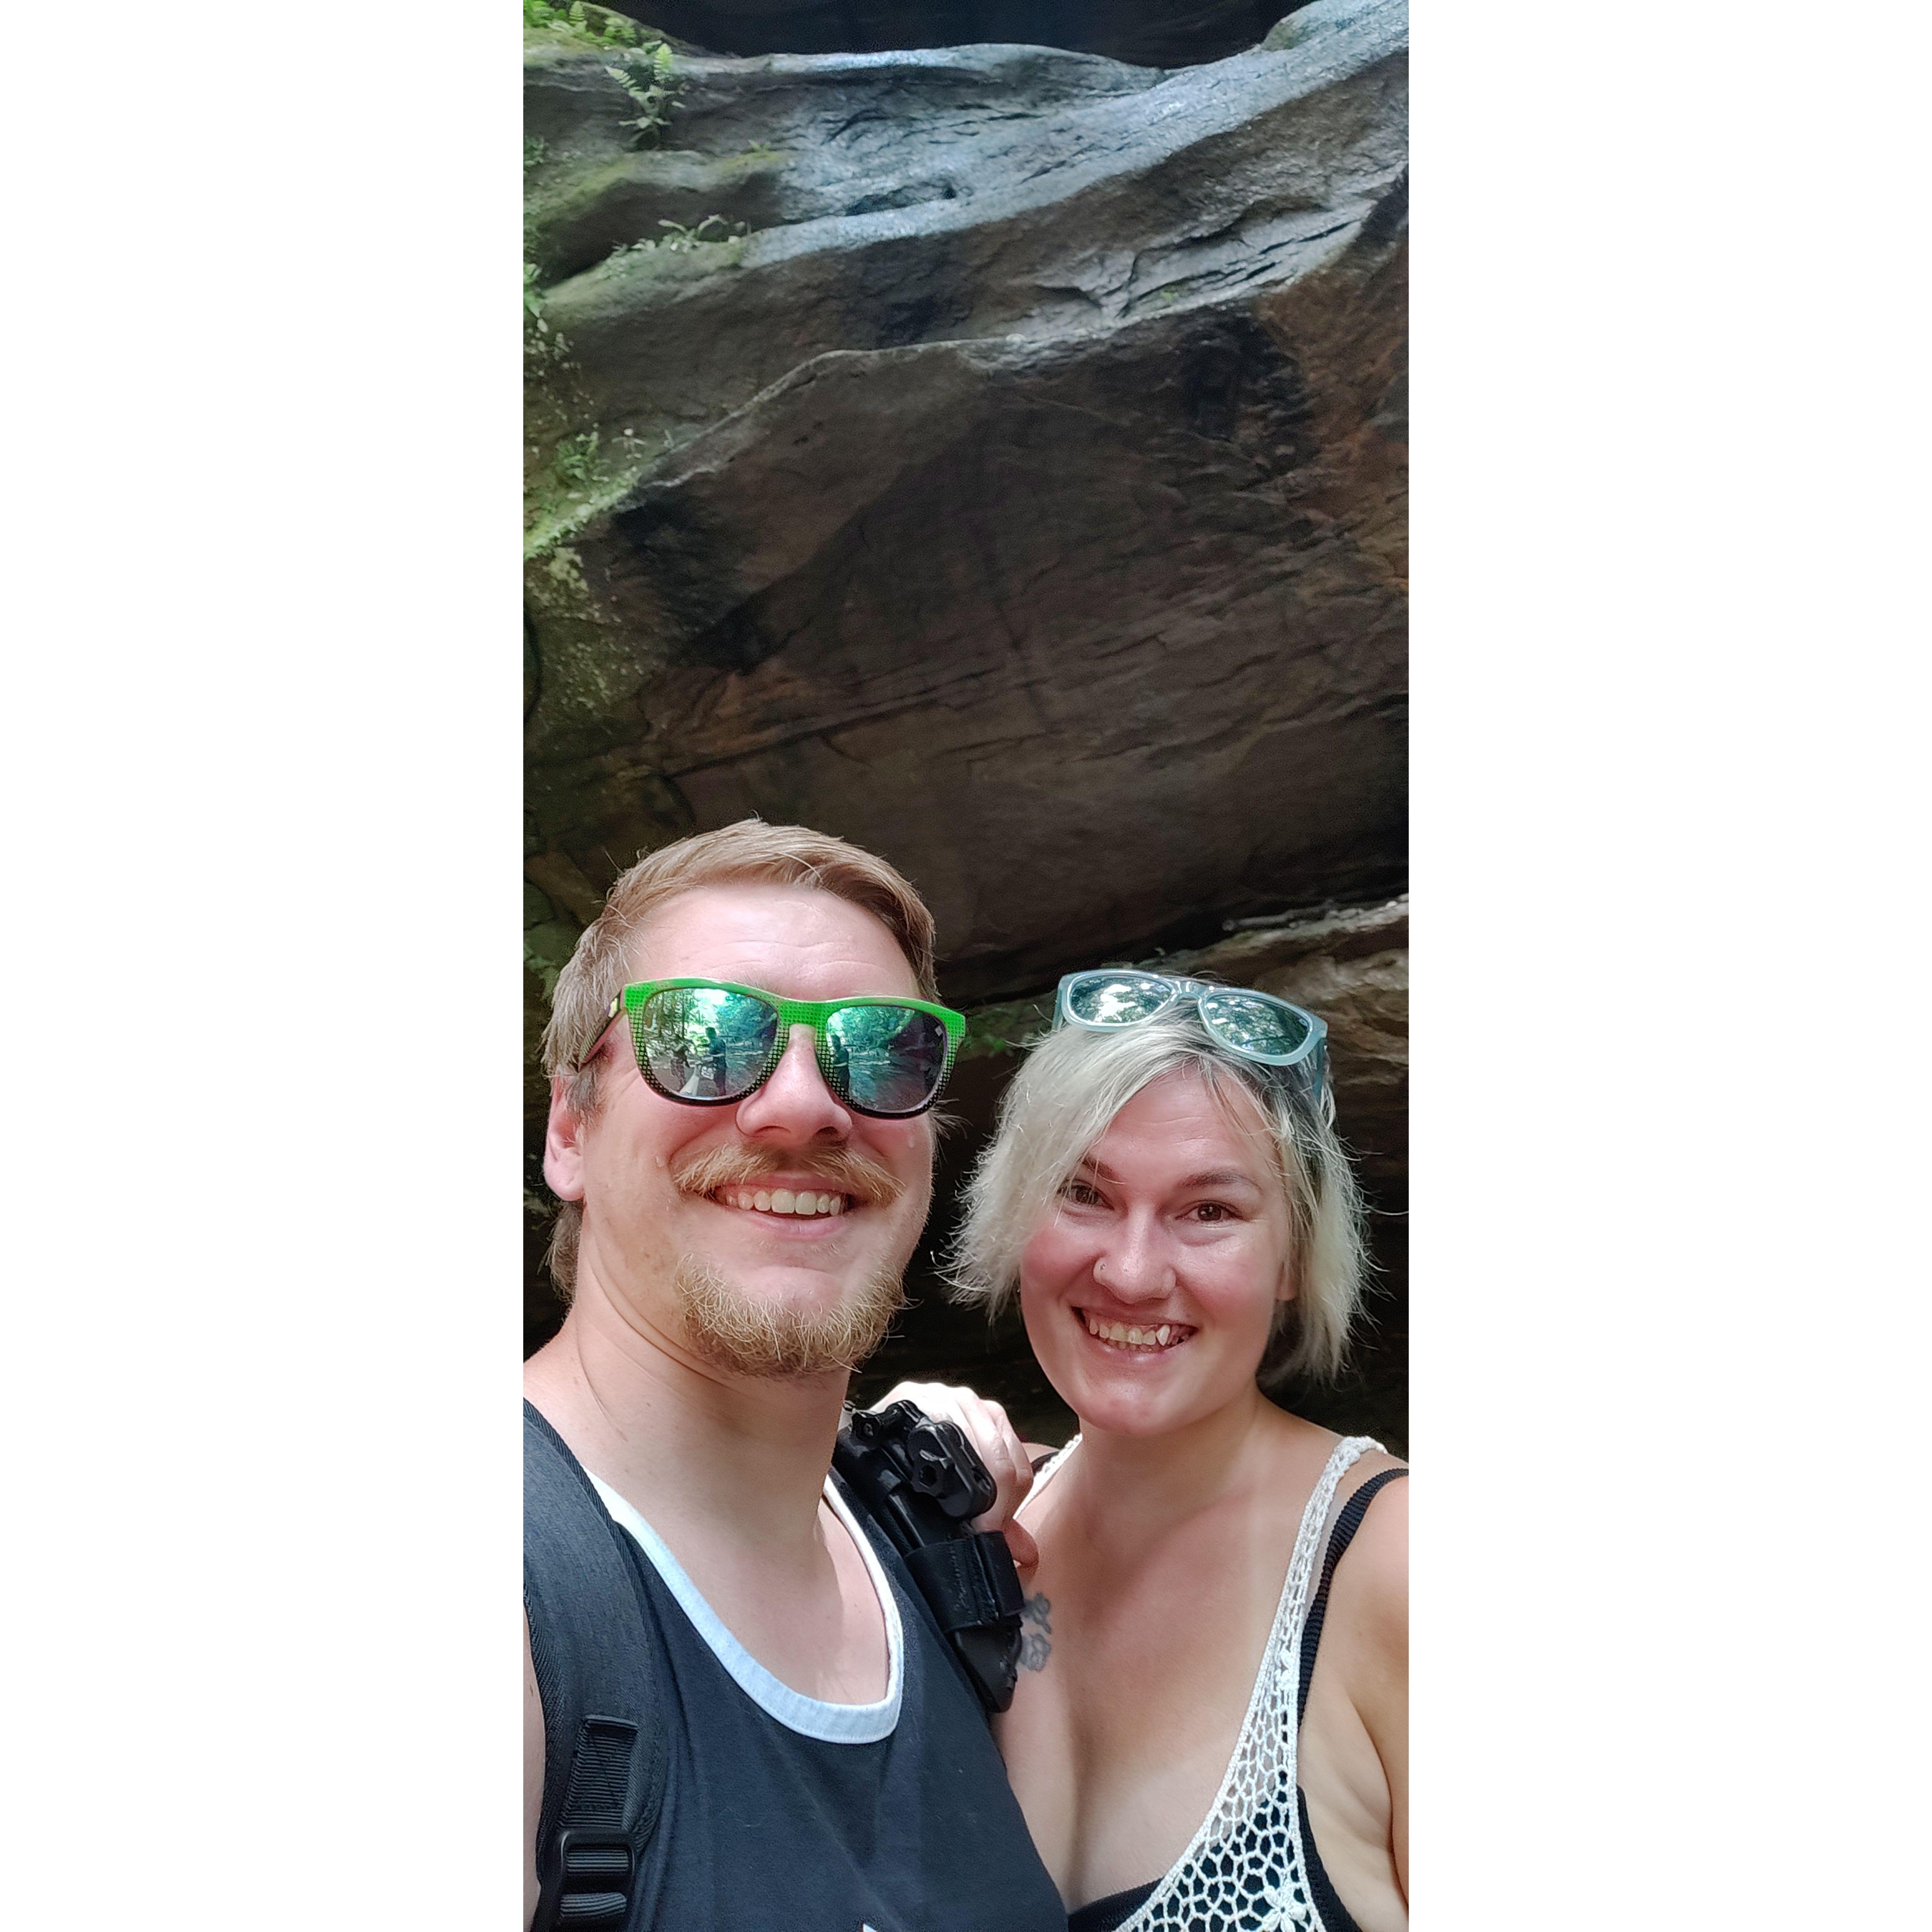 From our trip to Hocking Hills